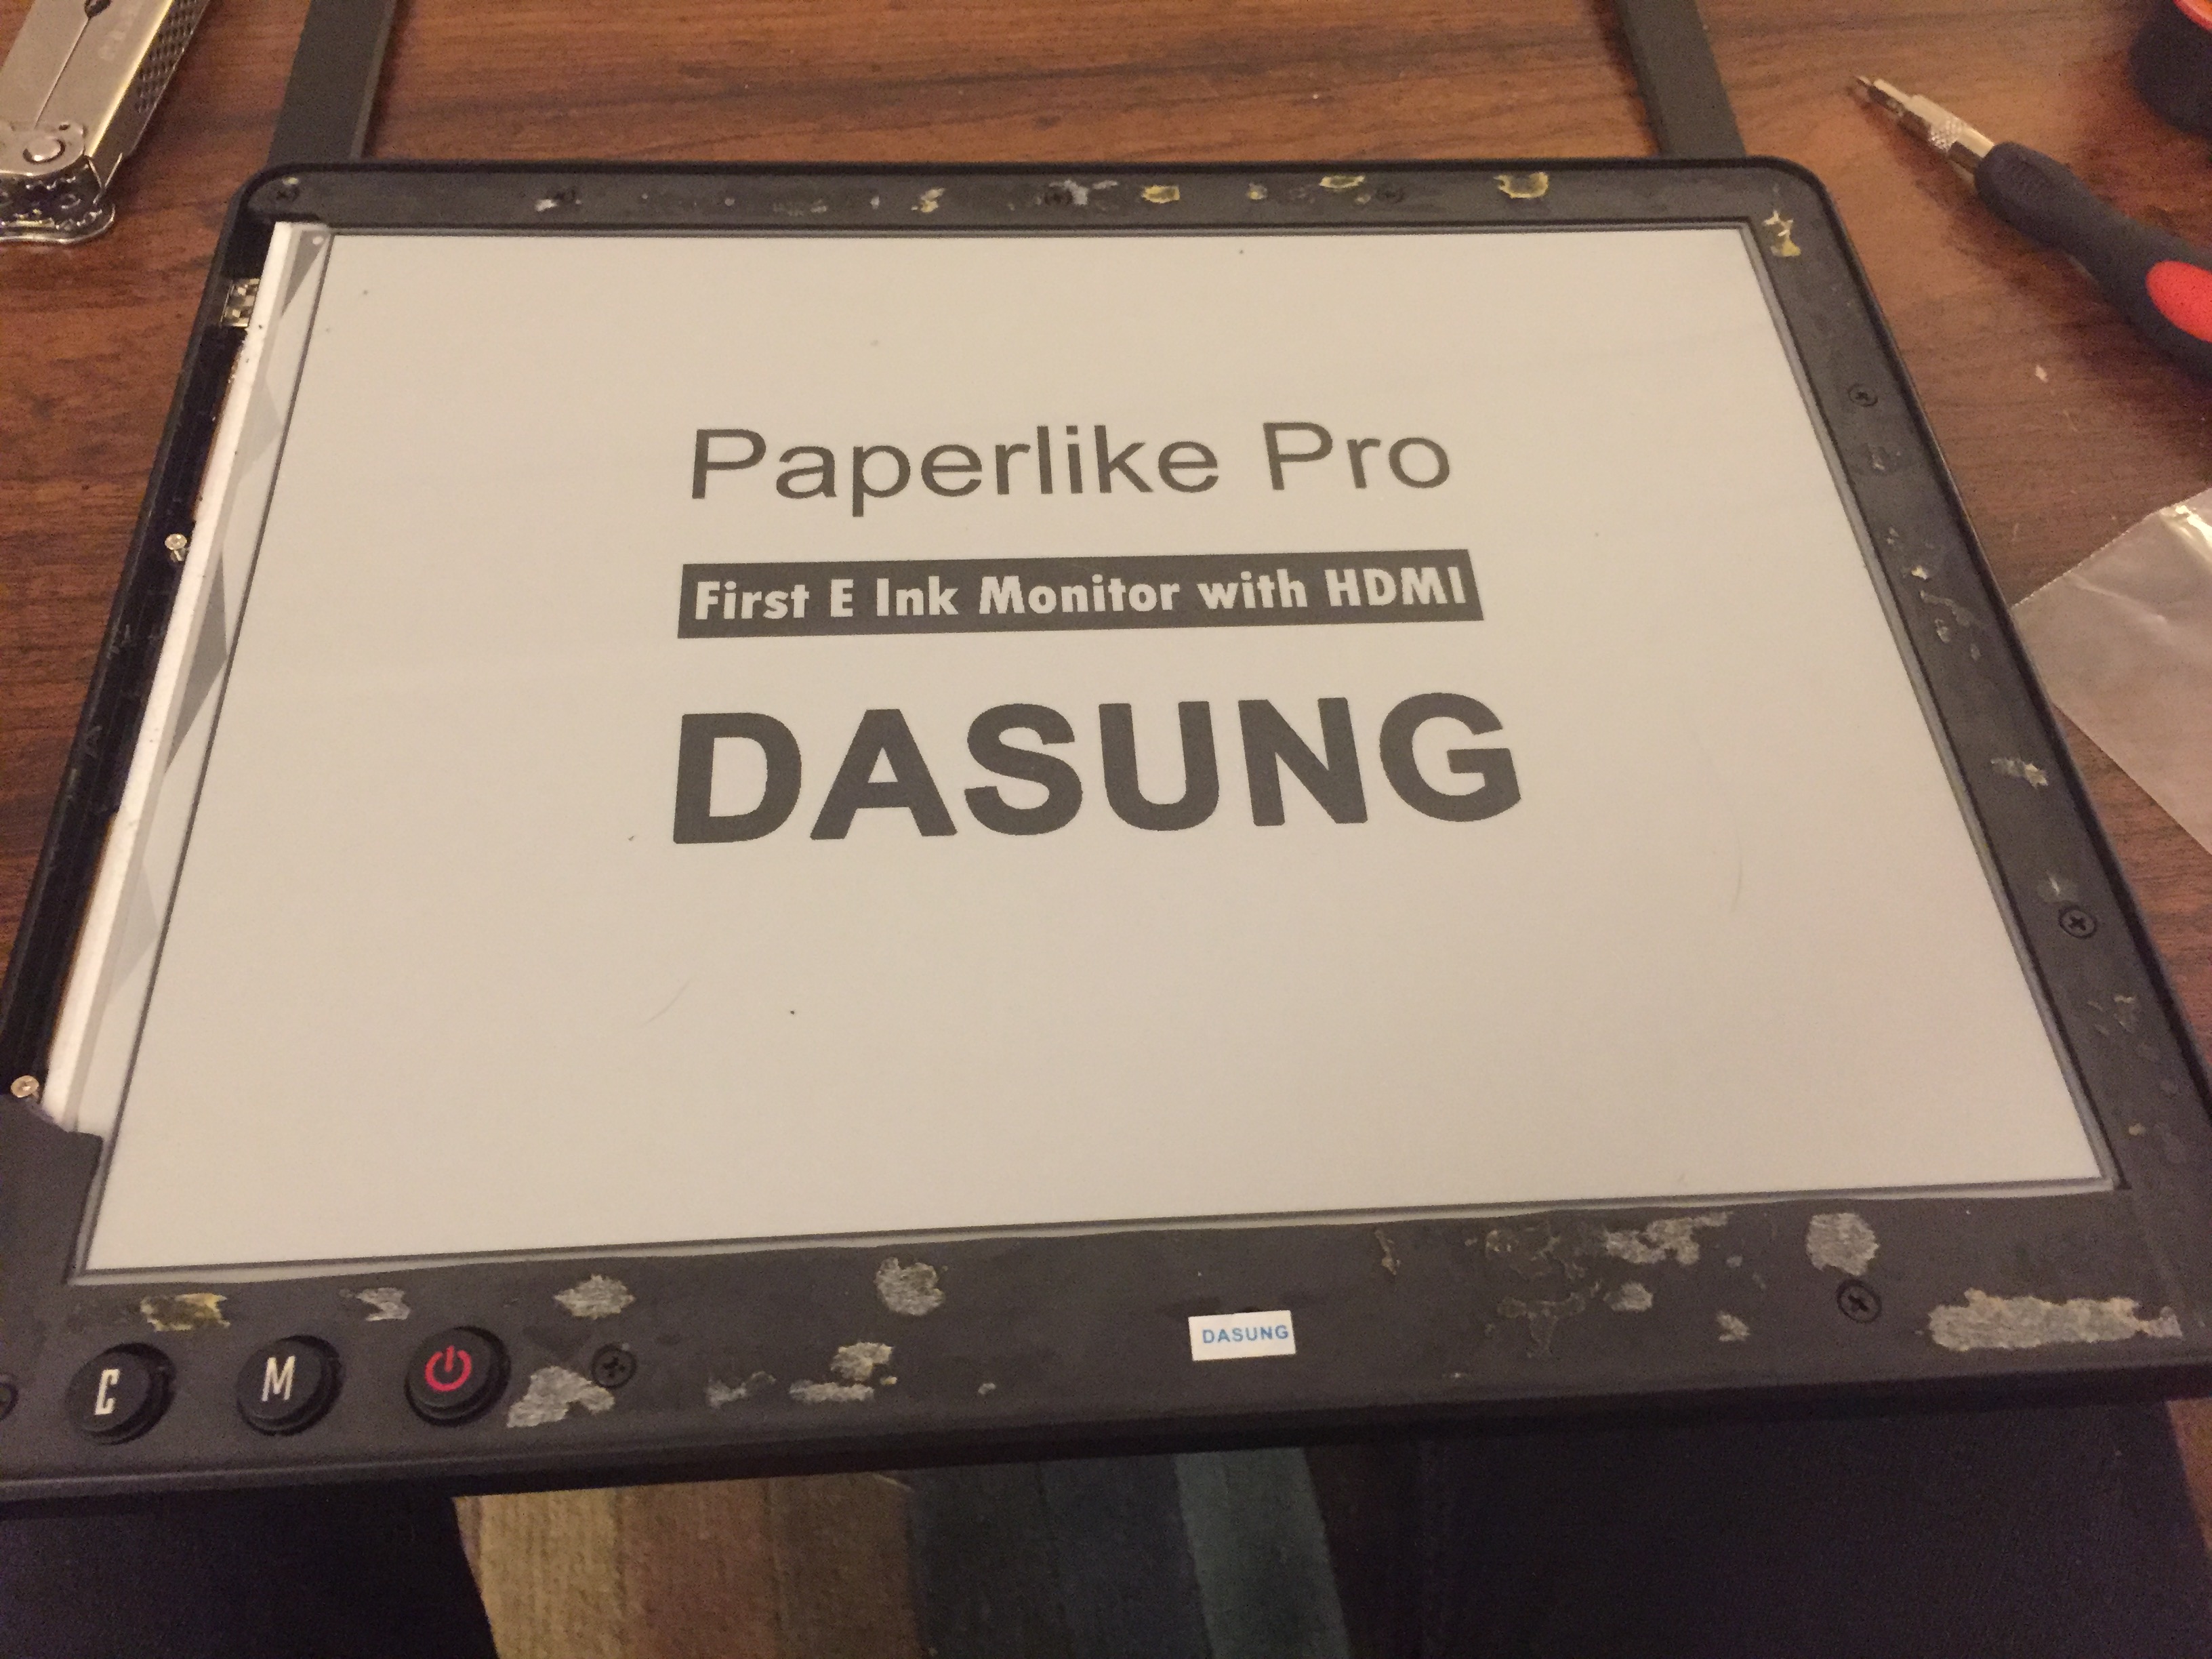 How to dissasemble Dasung Paperlike Pro